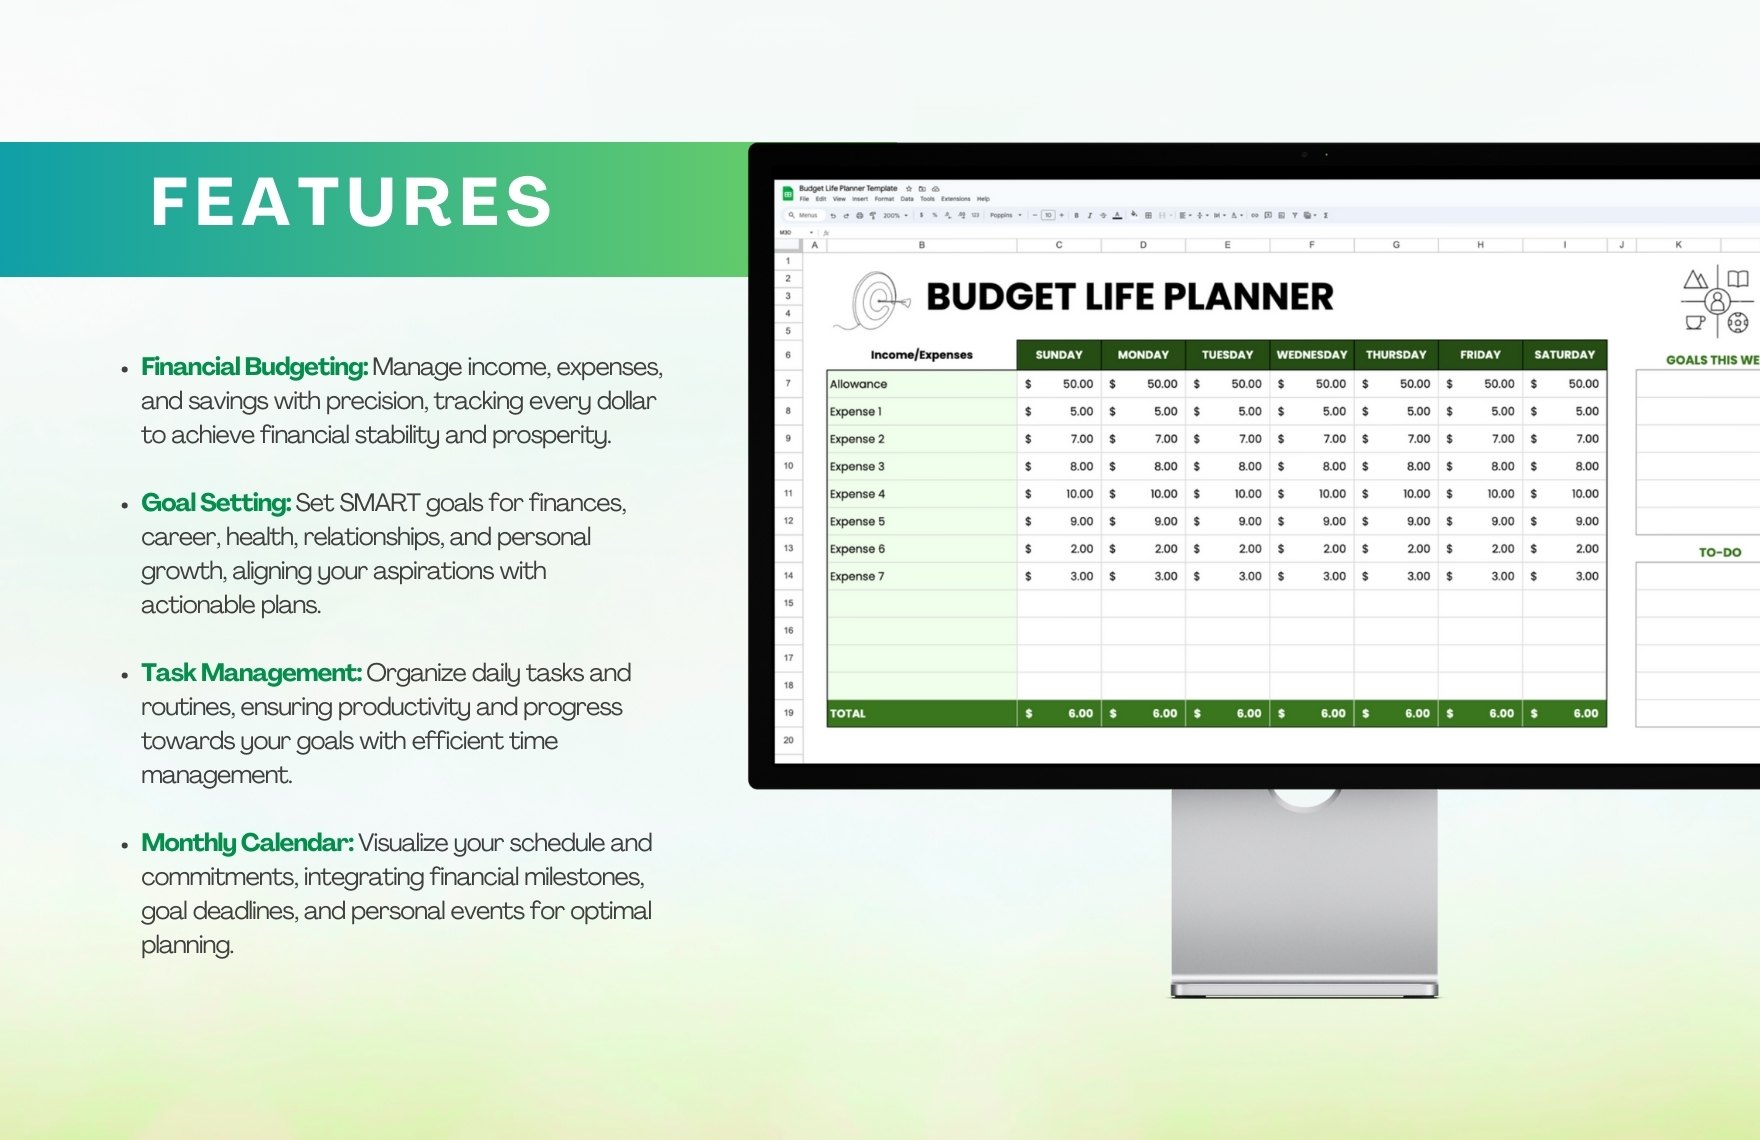 Budget Life Planner Template